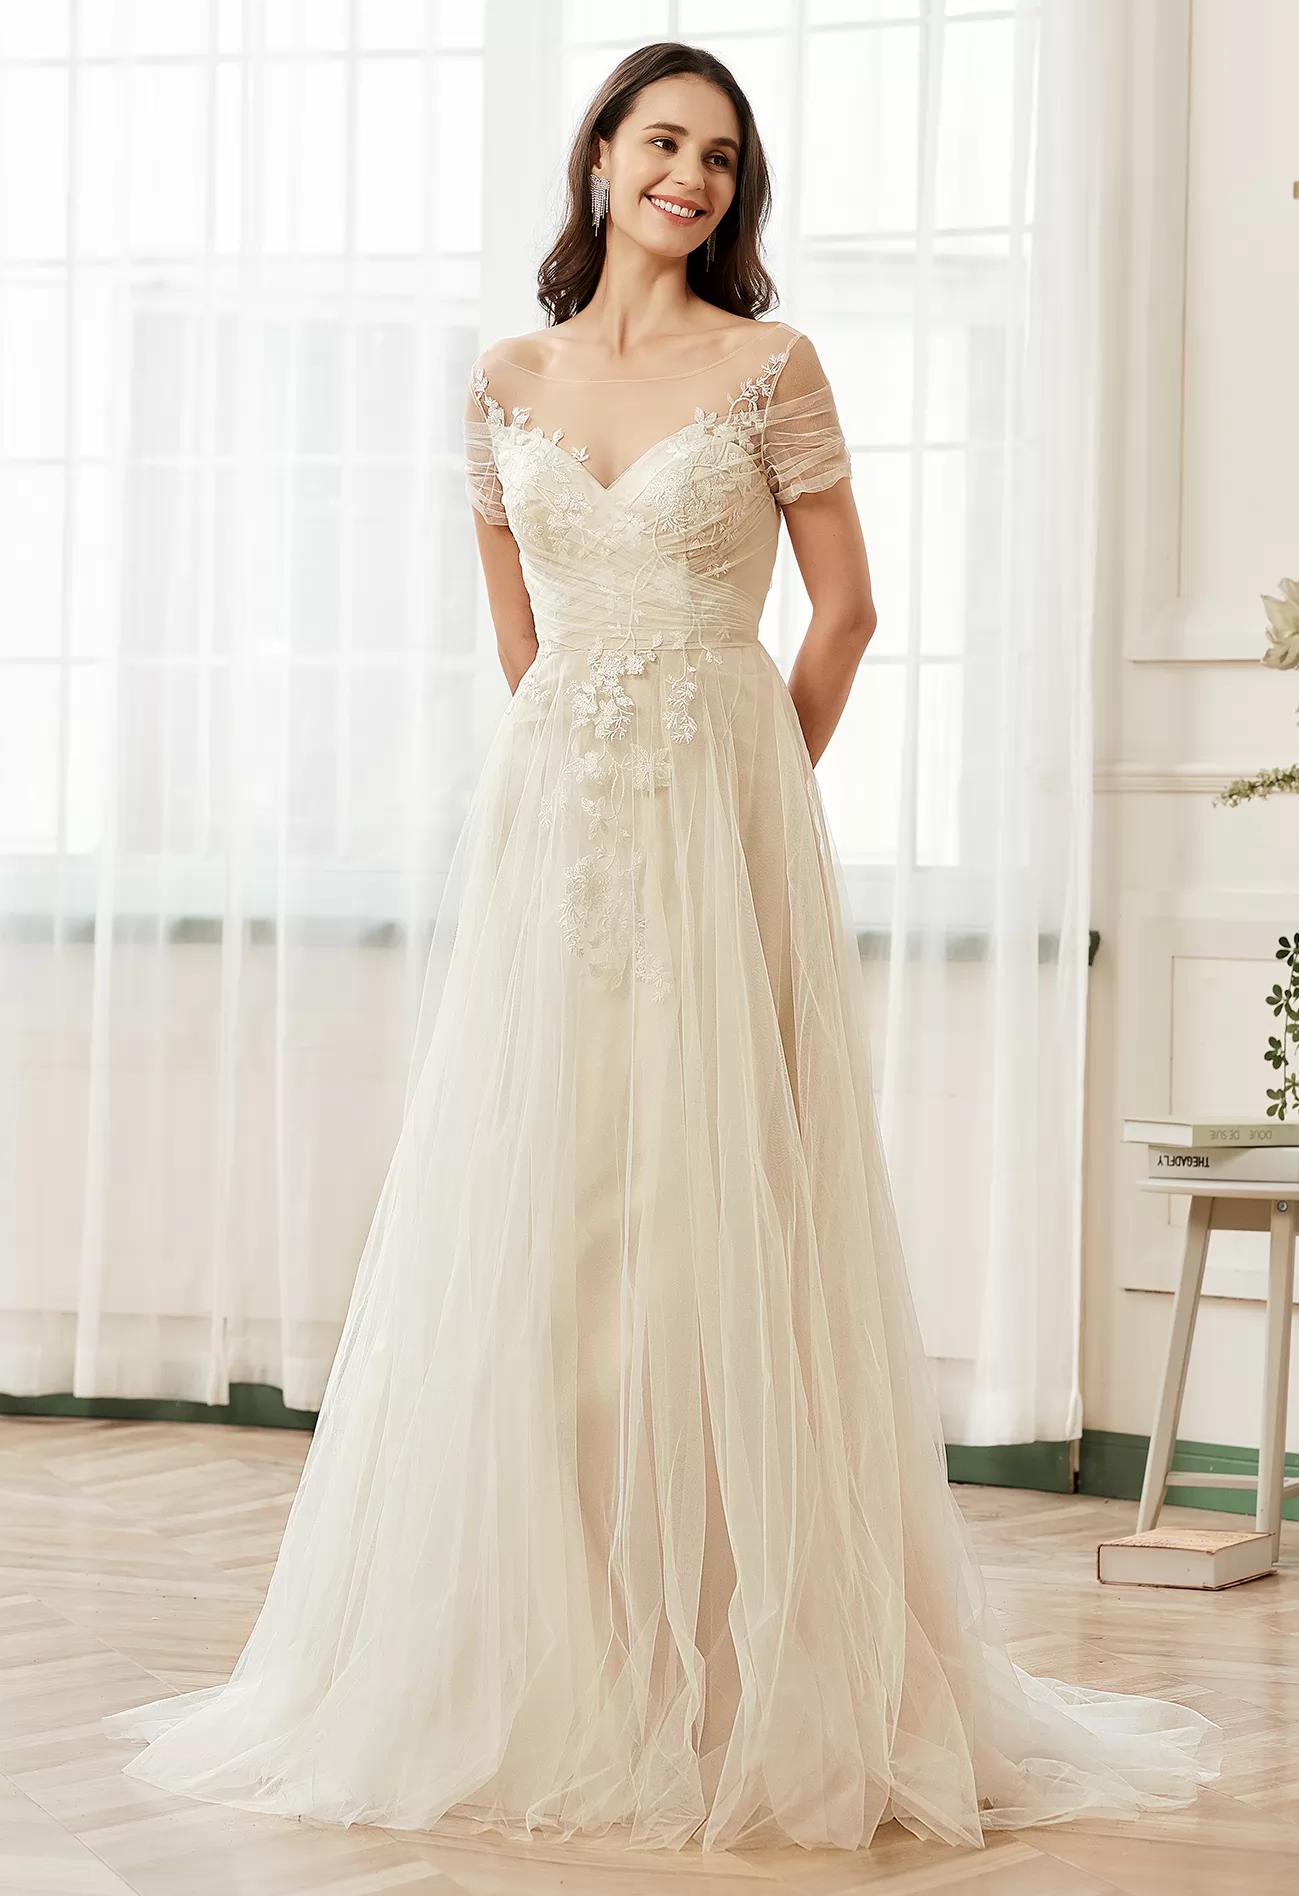 Romantic Off the Shoulder Illusion Pleated Bodice Tulle Bridal Gown